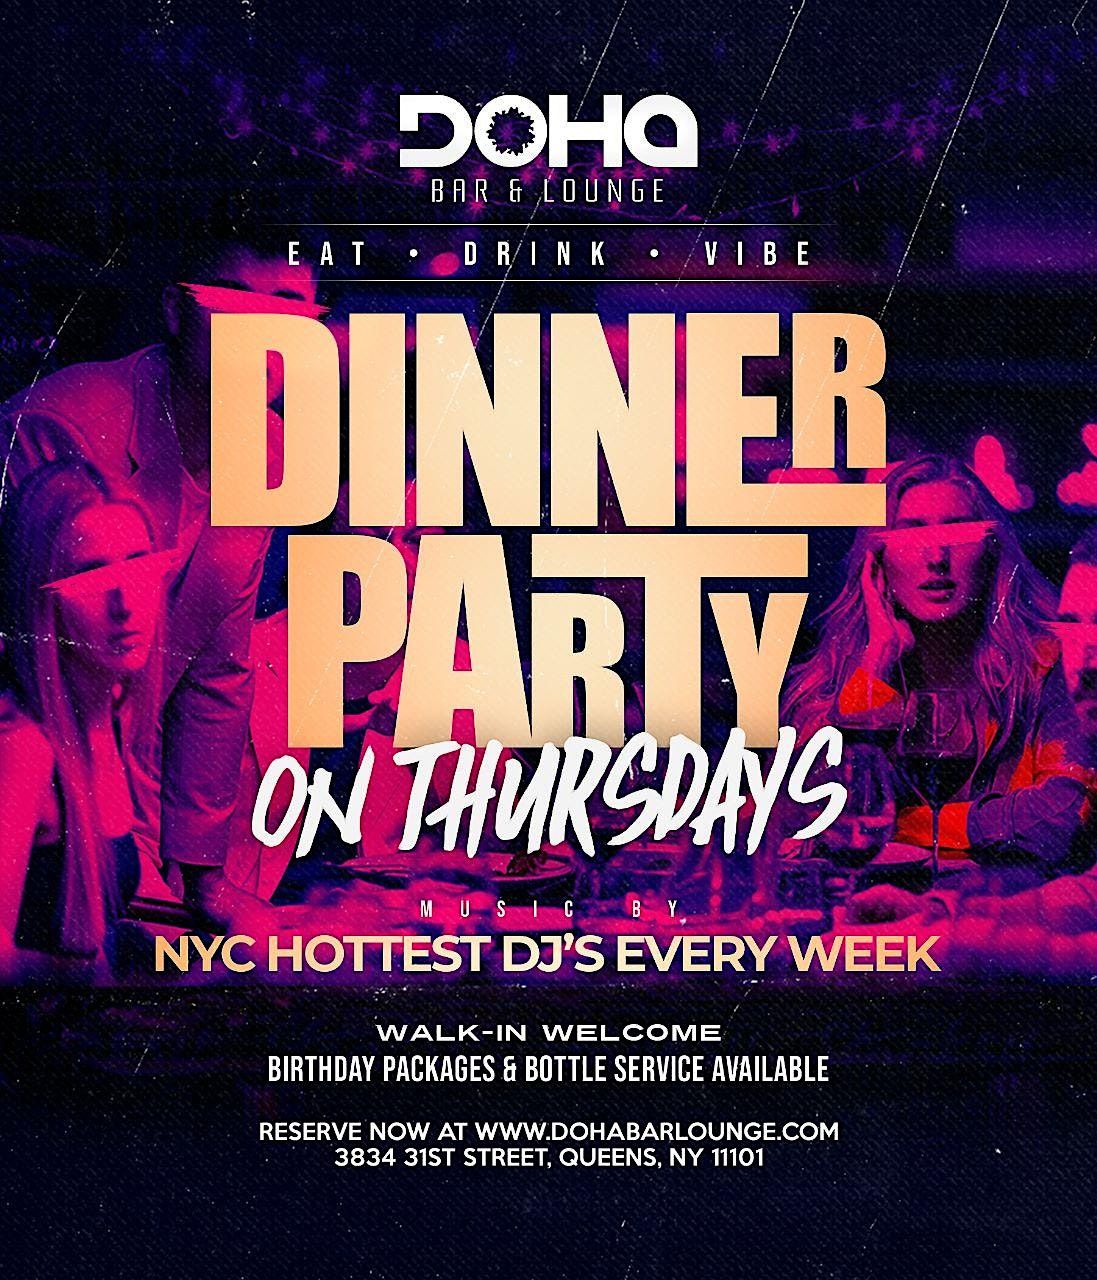 Afterwork Thursdays at Doha Bar Lounge in Long Island City, Queens